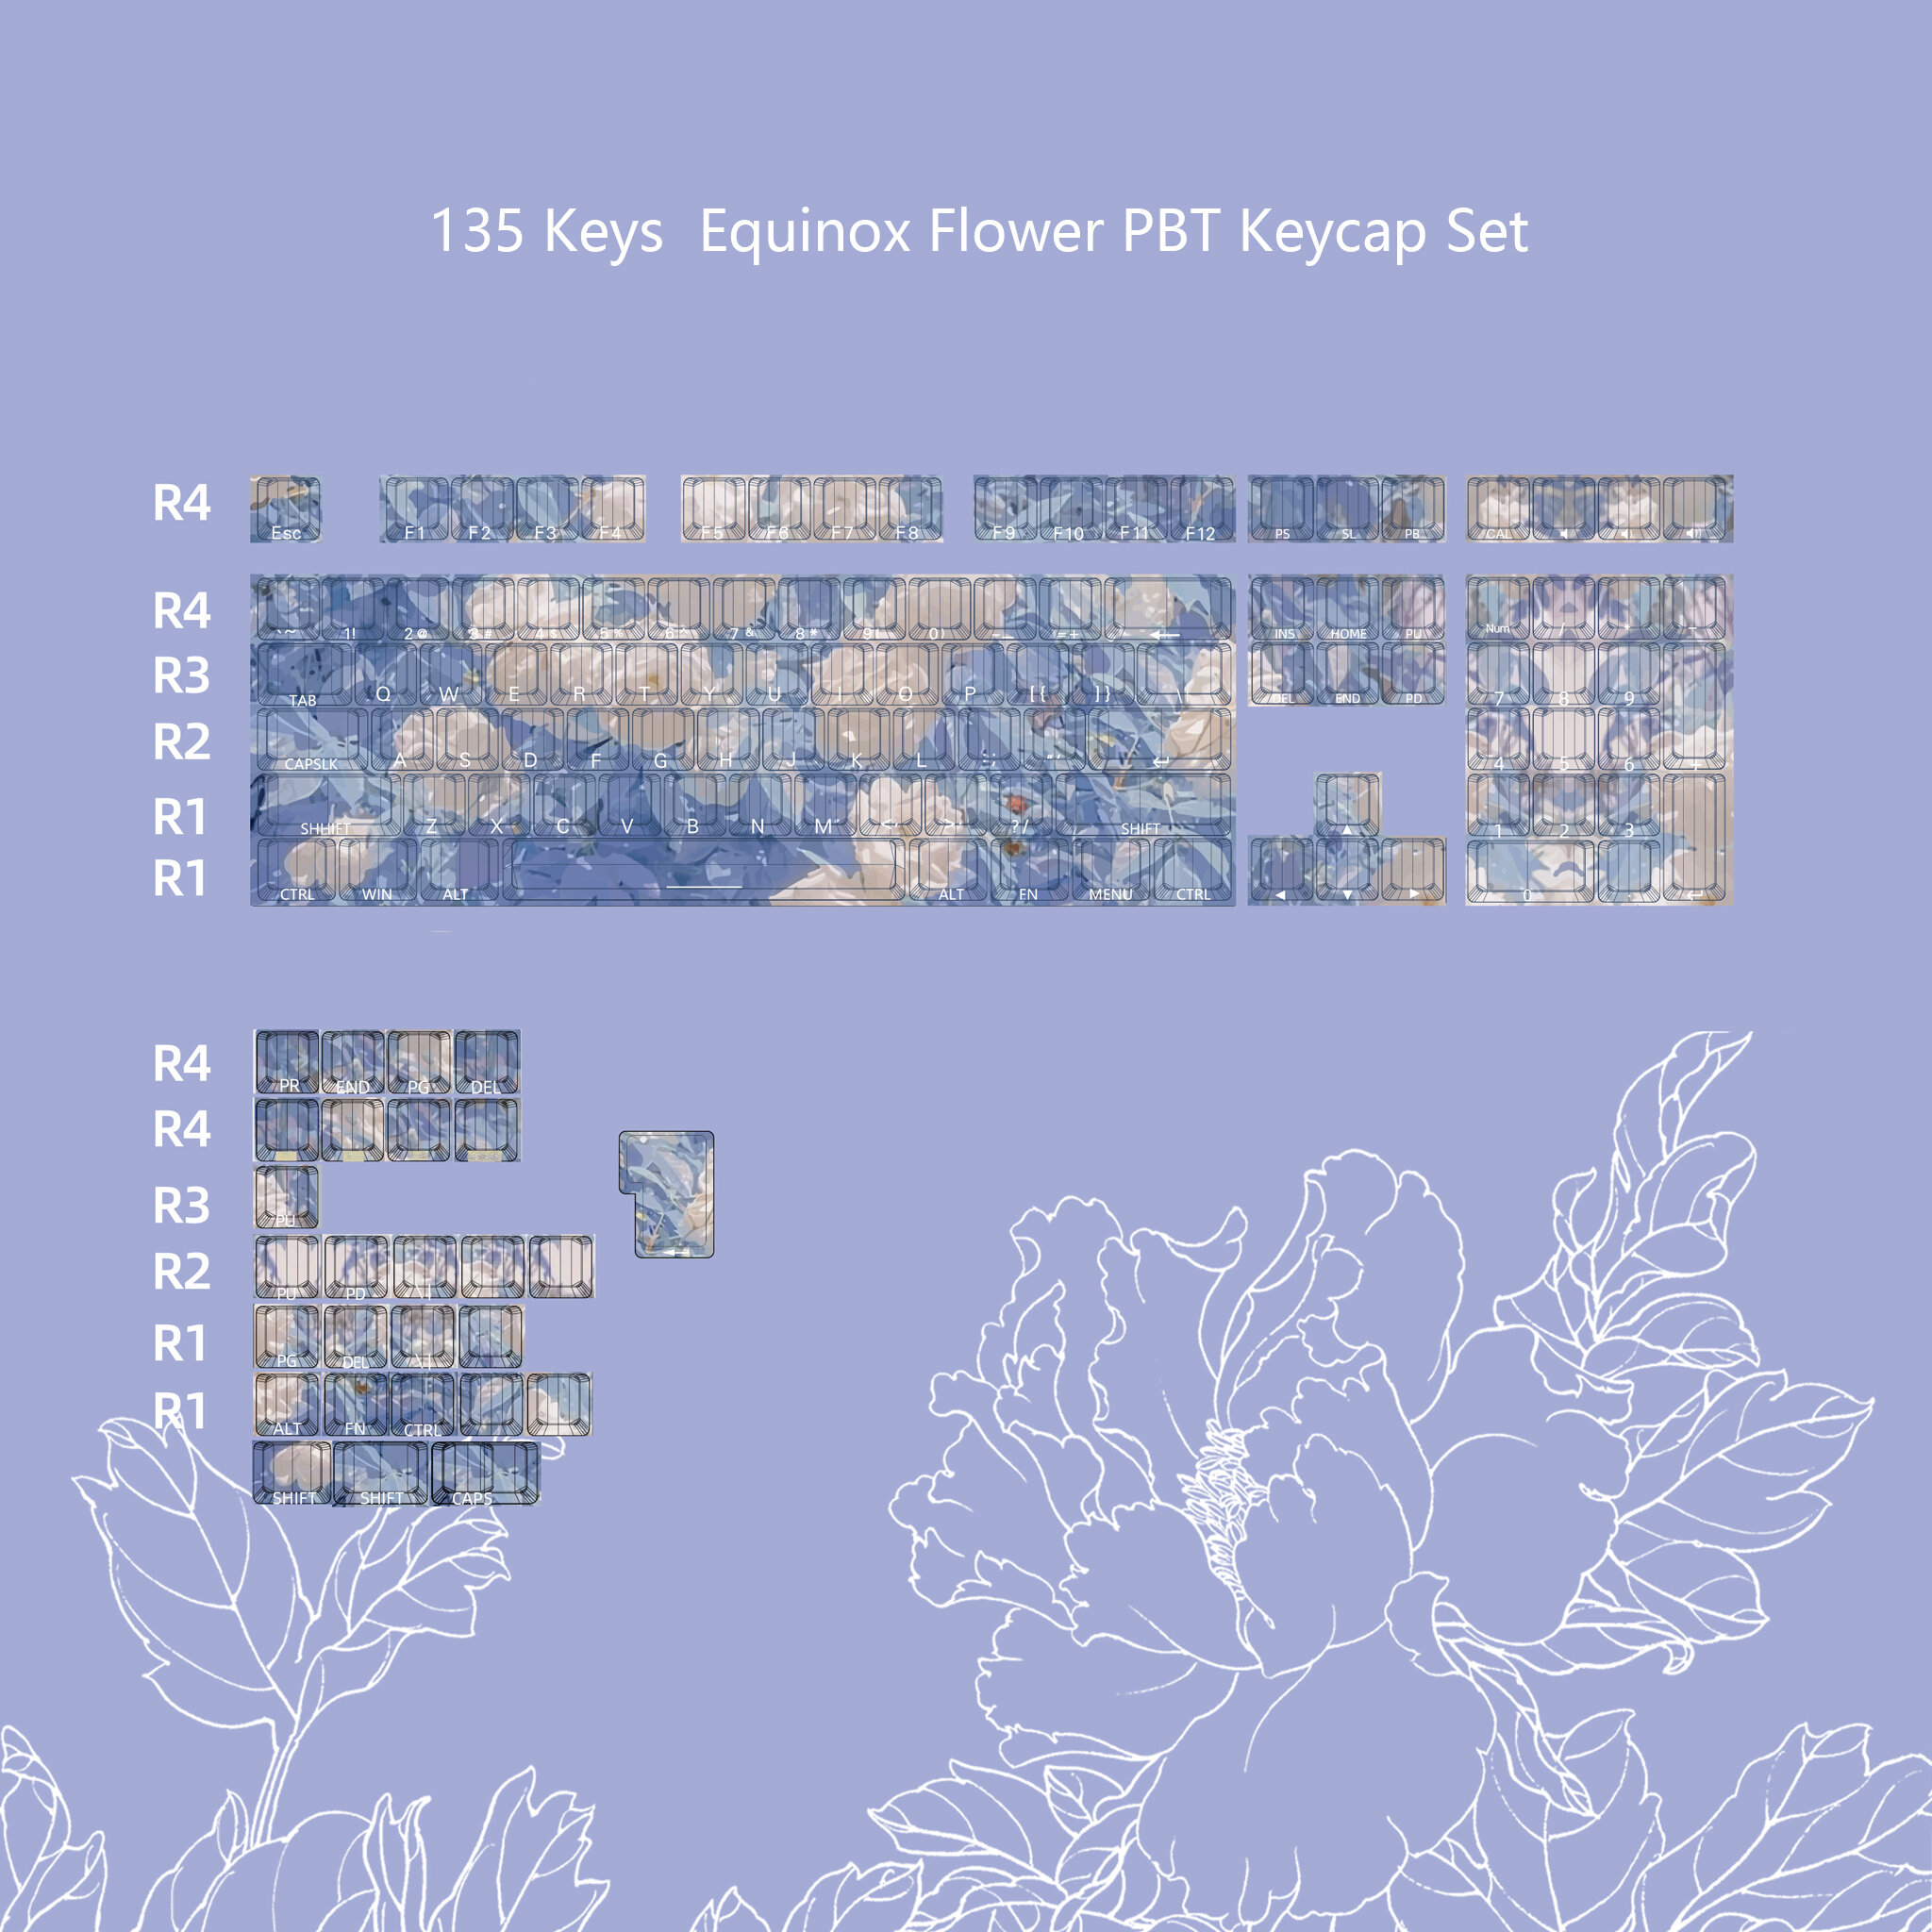 

135 Keys Chinese Equinox Flower PBT Keycap Set Cherry Profile Sublimation Keycaps for 61/68/75/84/87/89/96/98 100/104/10